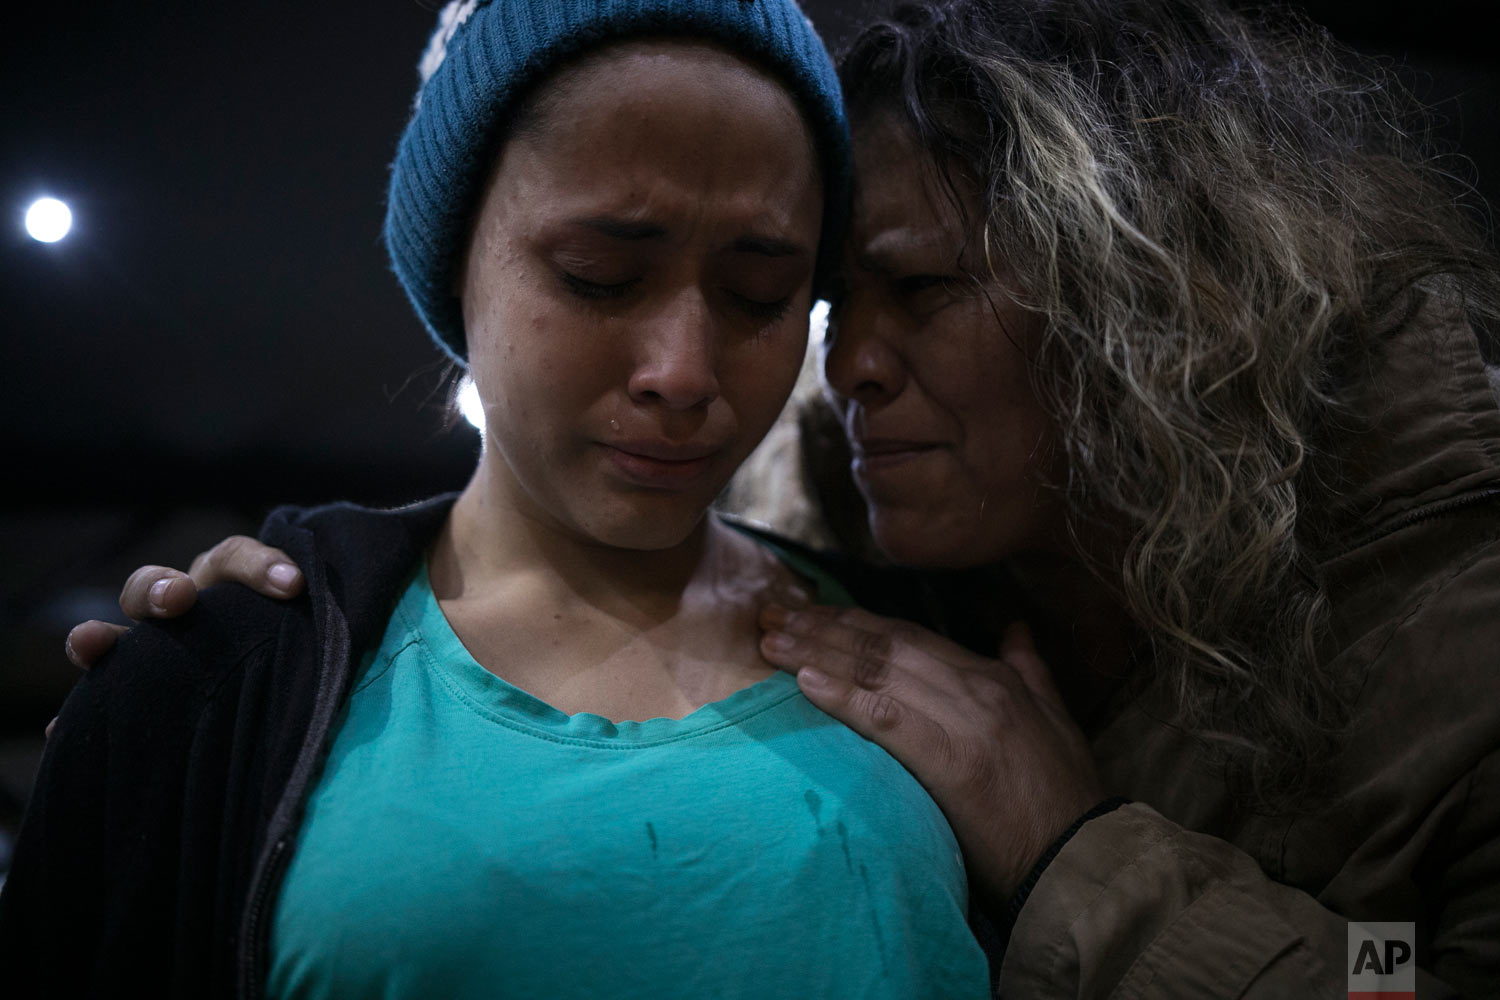  Pregnant 15-year-old El Salvador migrant Milagro de Jesus Henriquez Ayala, is comforted by a local church member as she cries during a Christian religious service at the Agape World Mission shelter in Tijuana, Mexico, Feb. 8, 2010. (AP Photo/Emilio 